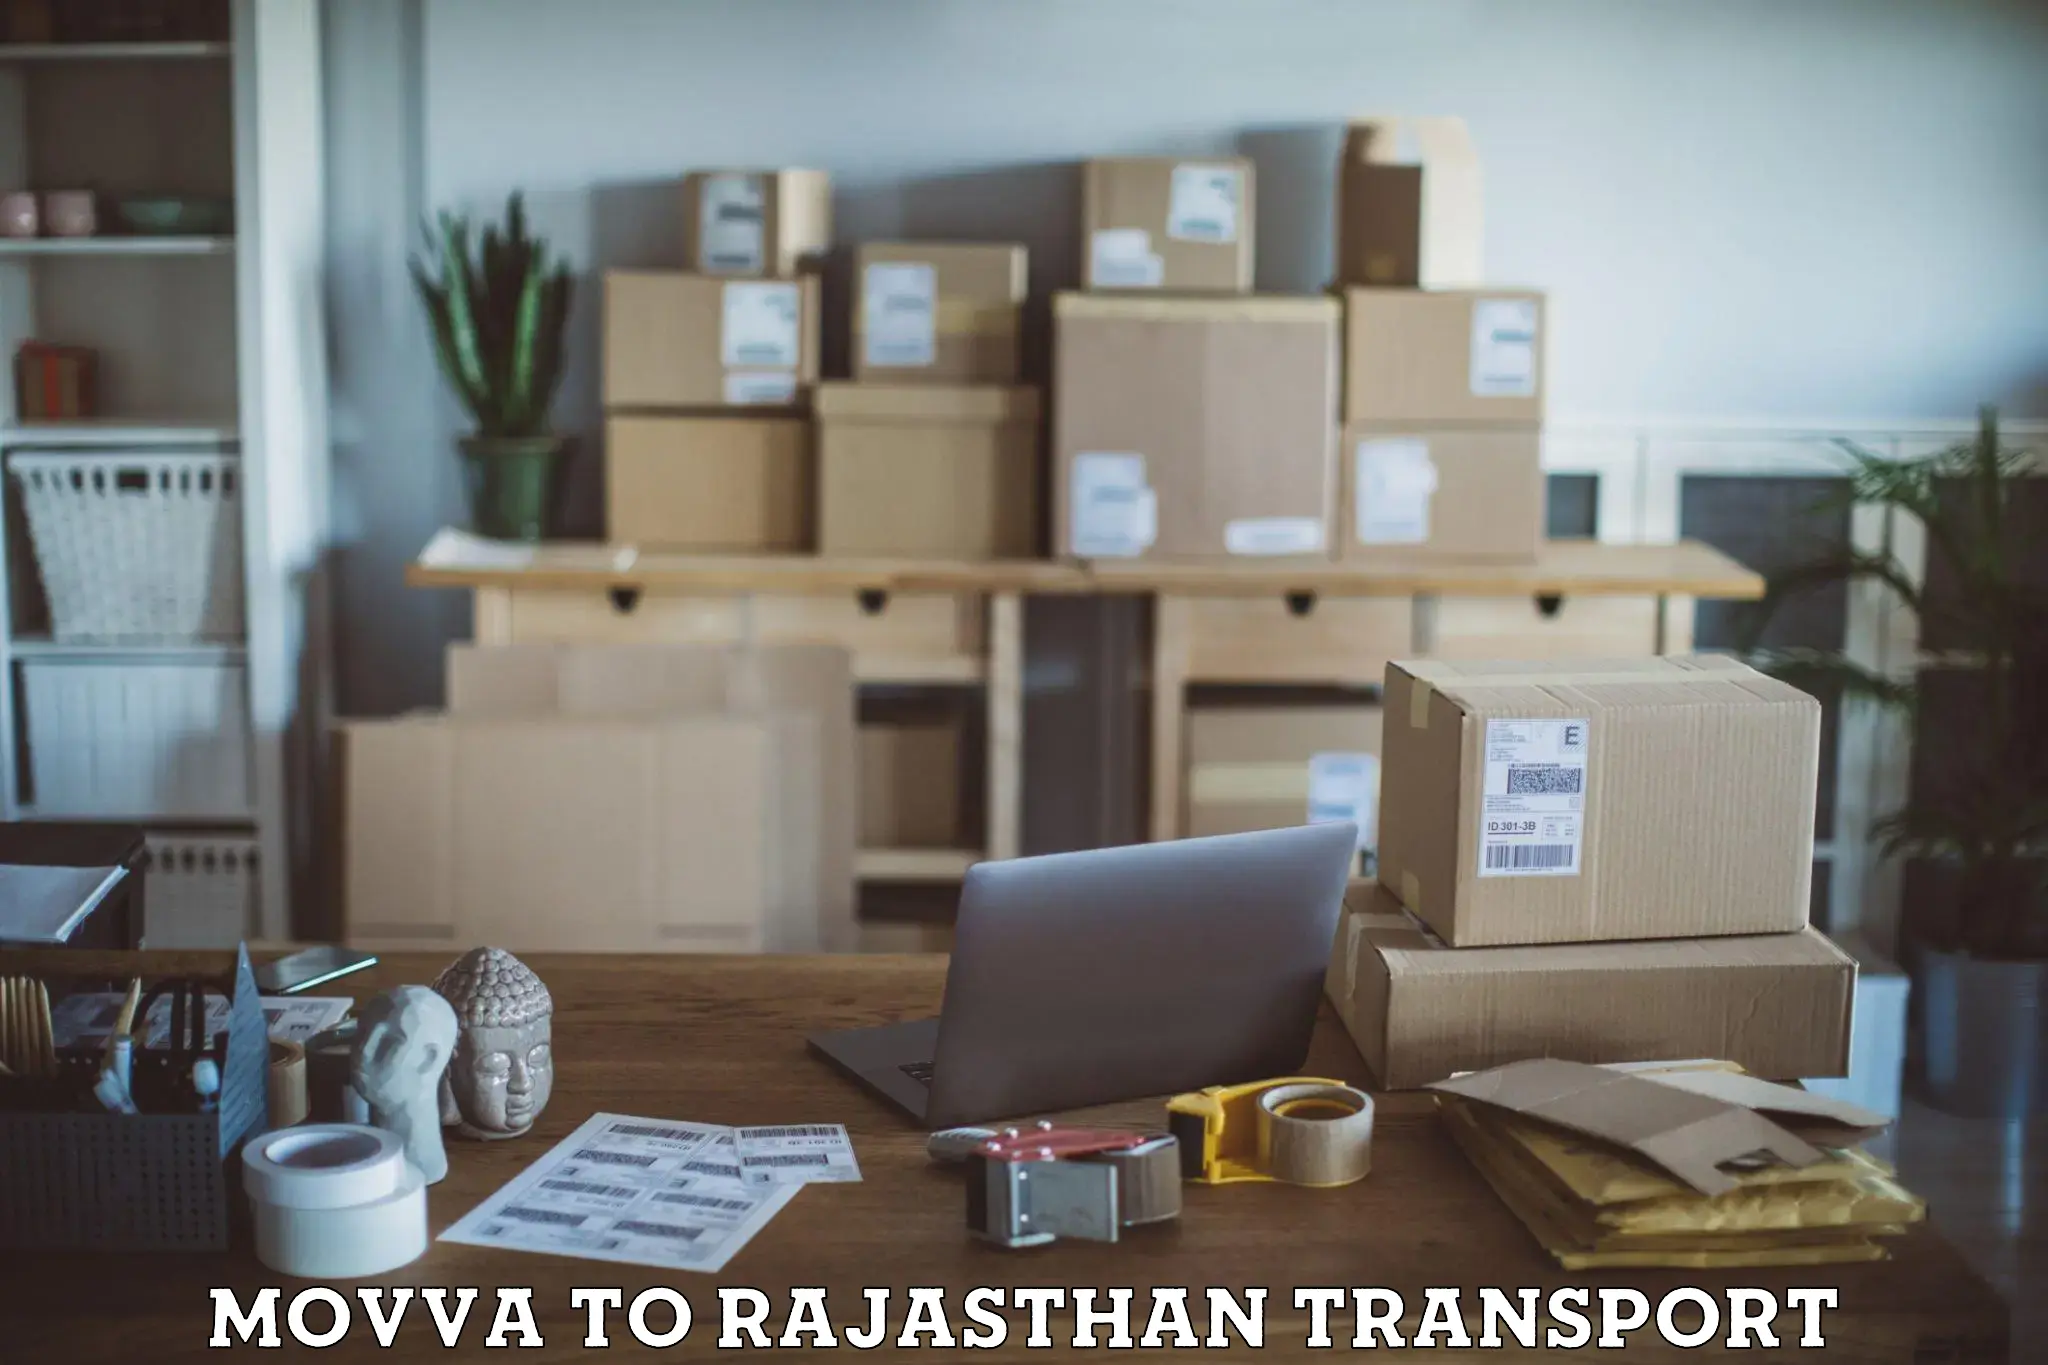 Air freight transport services Movva to Makrana